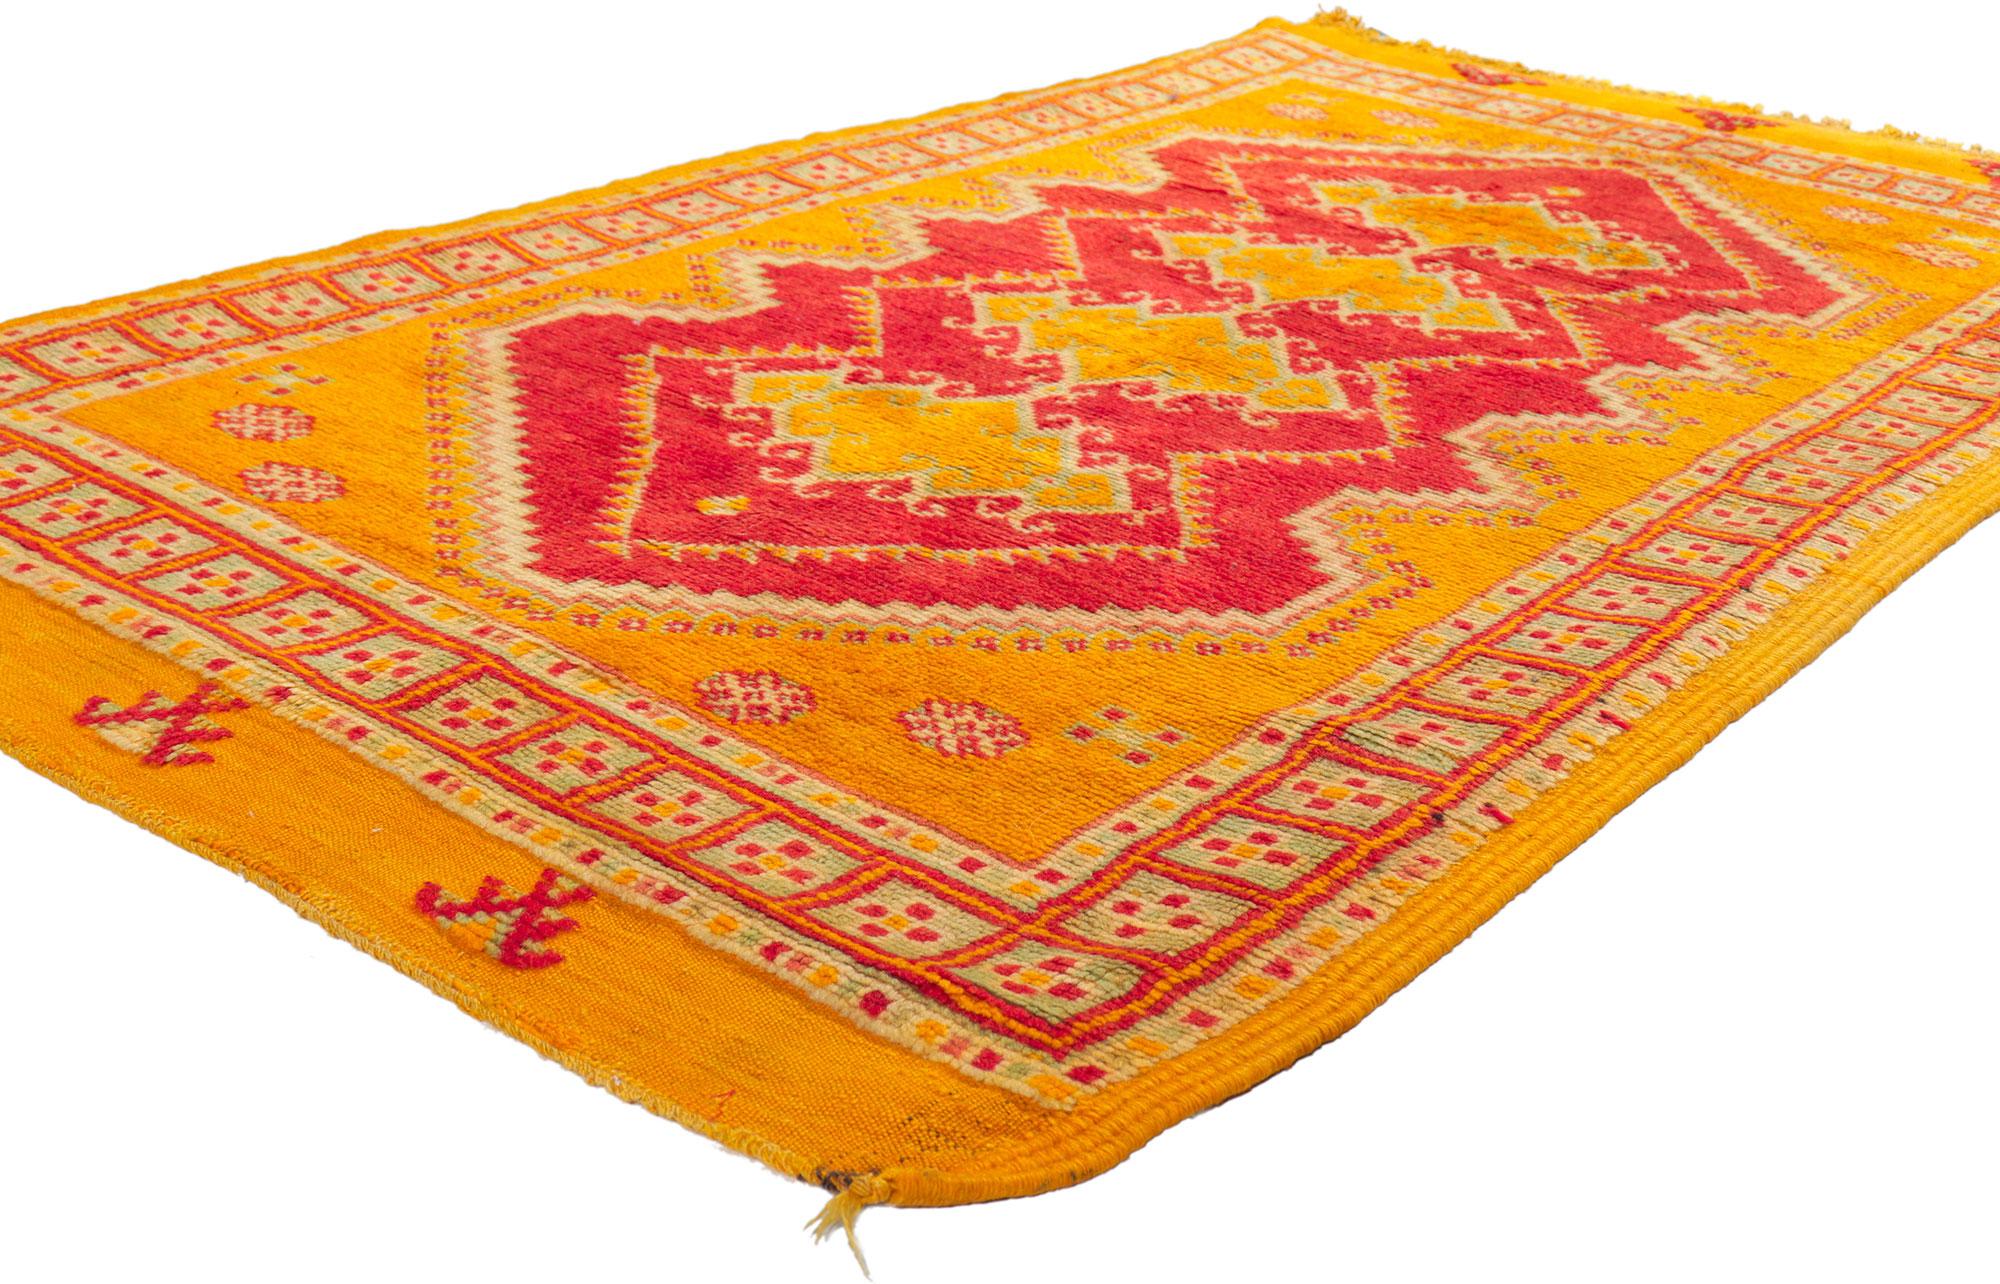 74570 Vintage Berber Moroccan Rug, 03’08 x 06’0. 
The Stark shades of yellow, orange and red woven into this piece work together to create a truly unique look. The variegated design pattern conjures the tribal feeling of Moroccan spirit in this